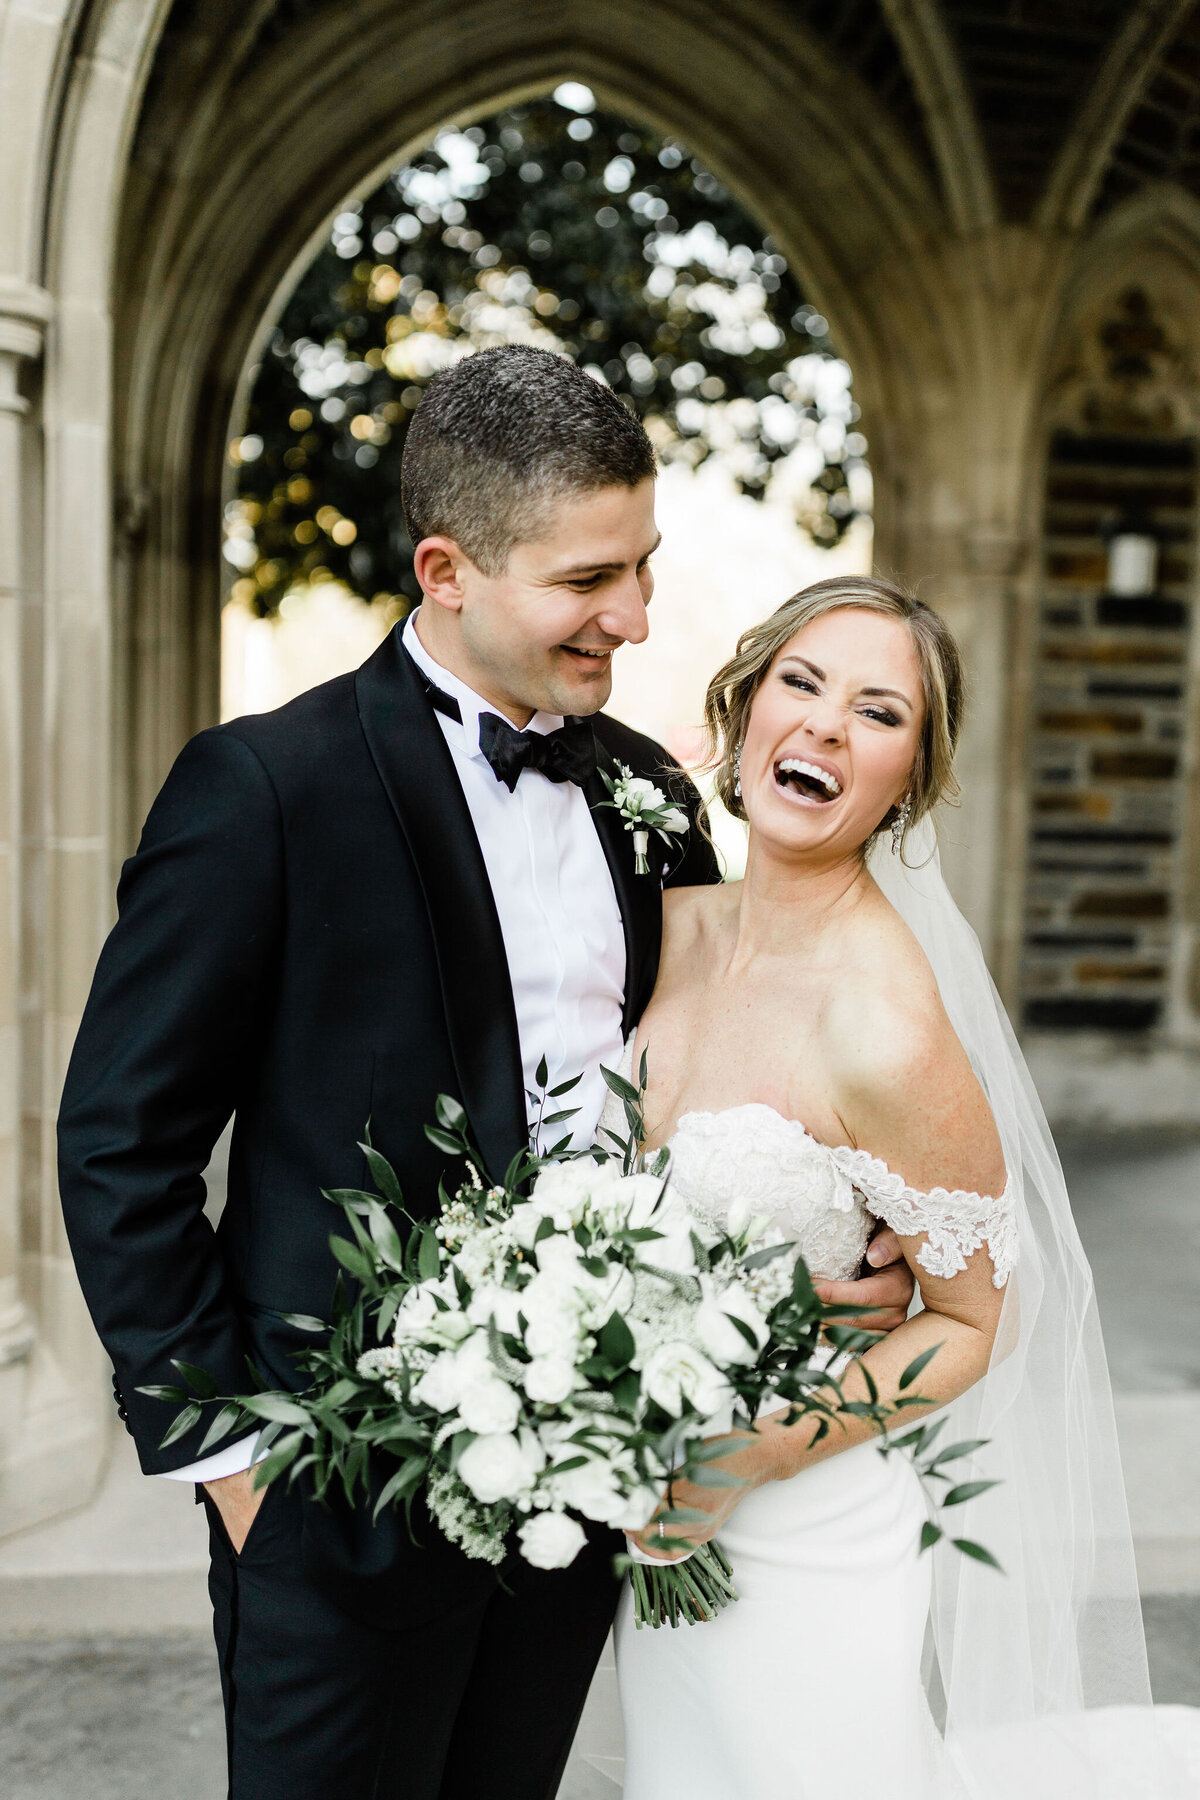 Using the amazing architecture of  Duke Chapel to frame these two gorgeous newlyweds, makes this photo one of our favorites.